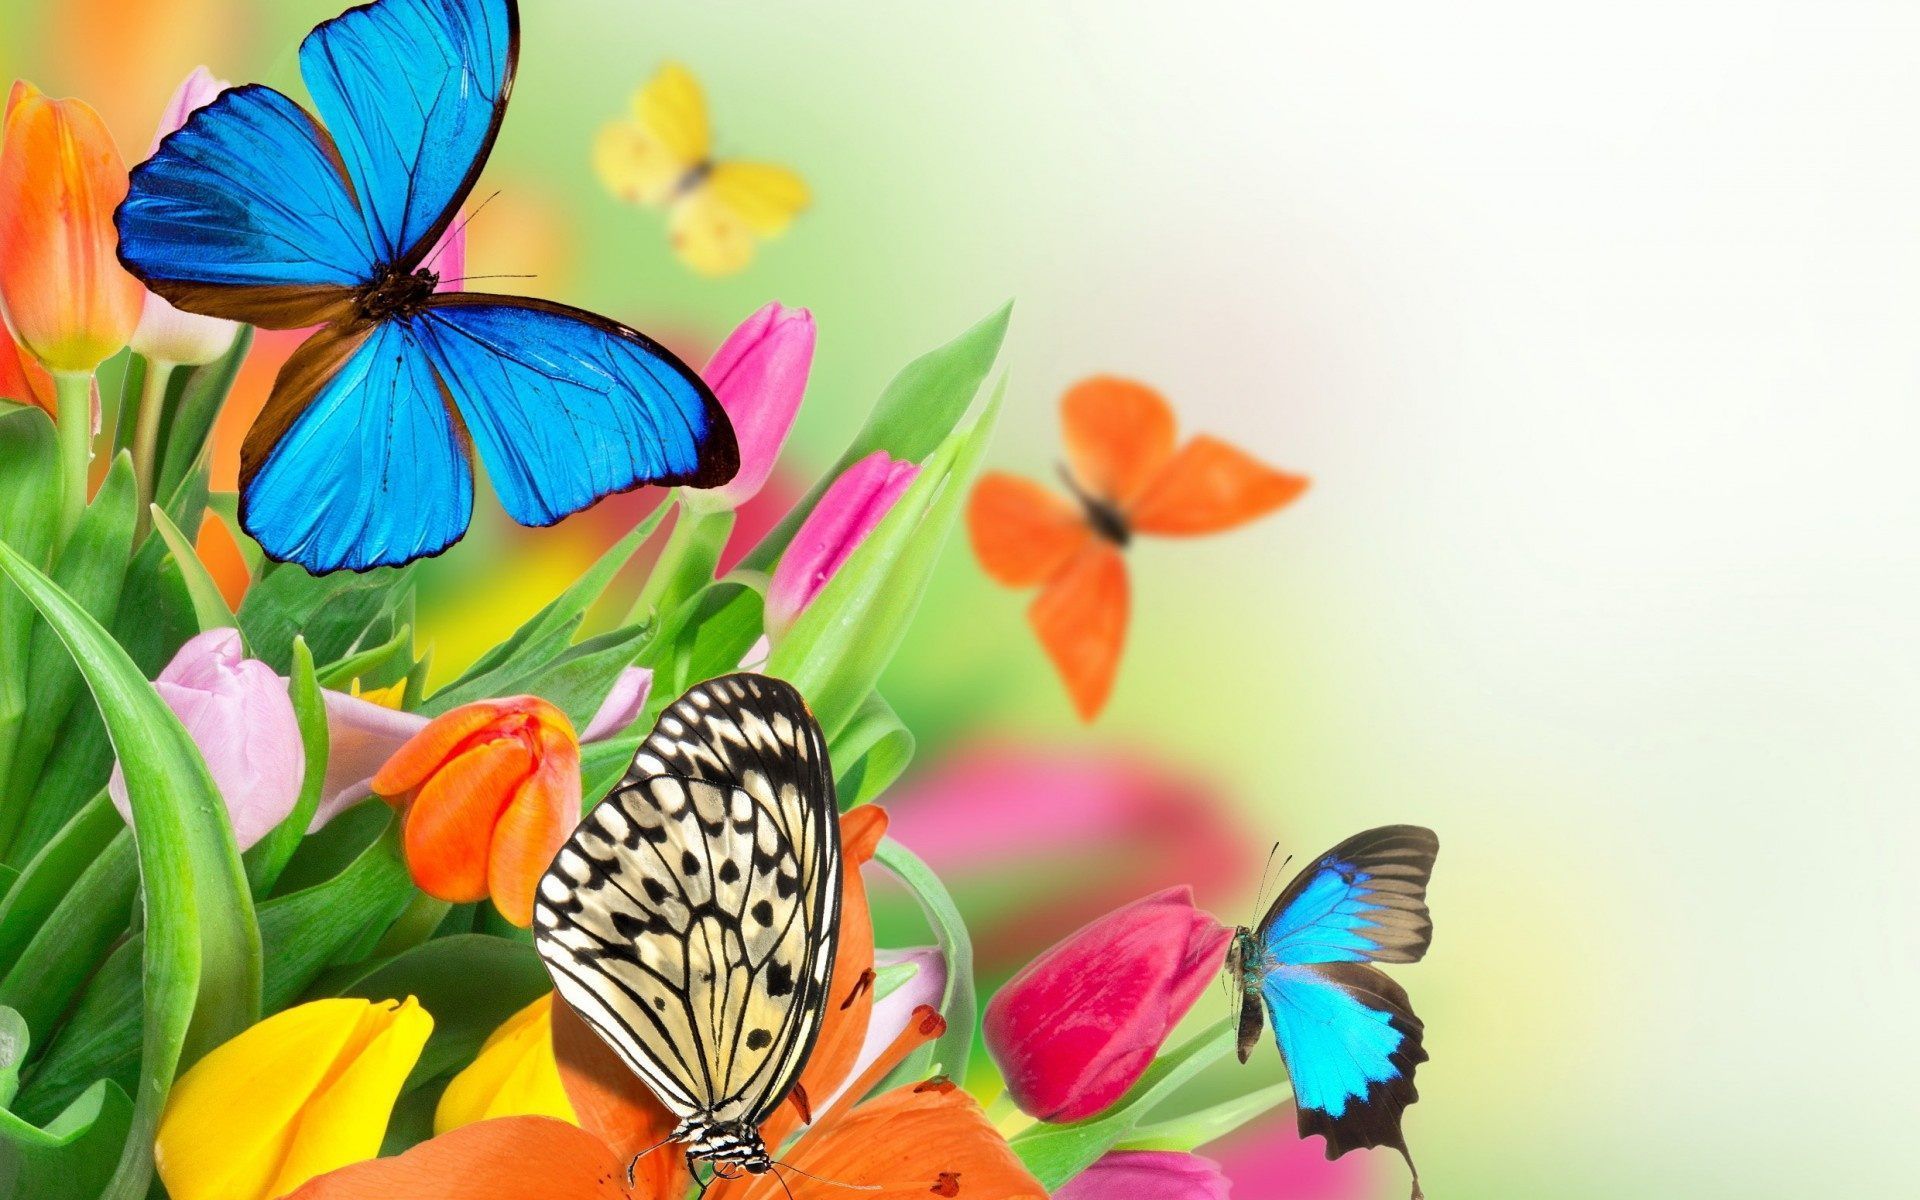 Colorful Butterfly Wallpapers - Top Free Colorful Butterfly